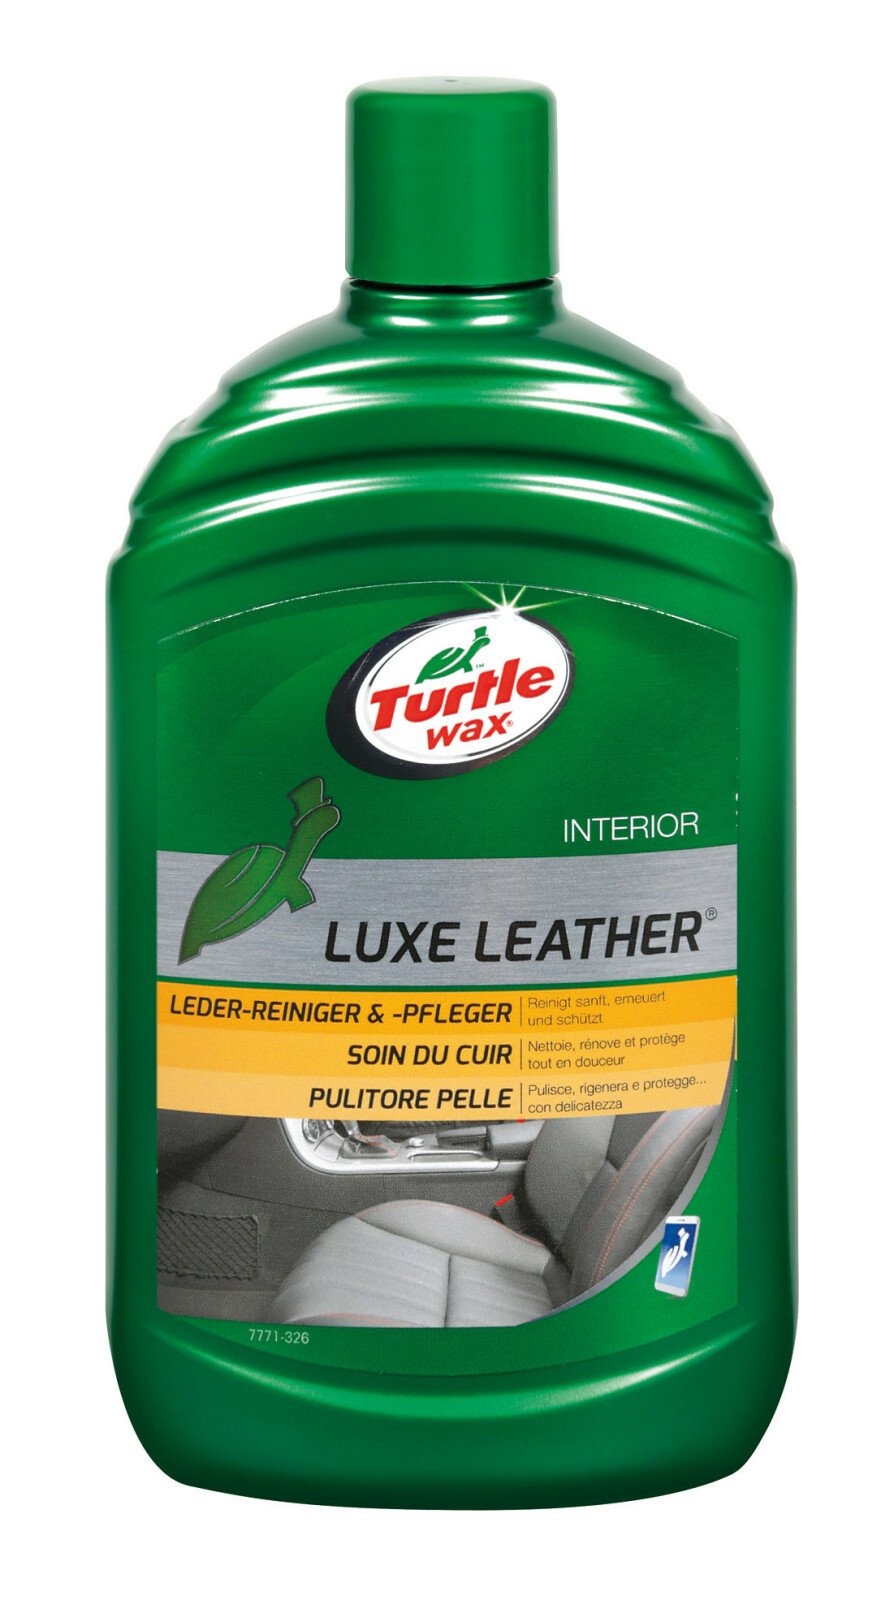 Turtle wax Leather cleaner and conditioner - cream 500 ml - Cridem